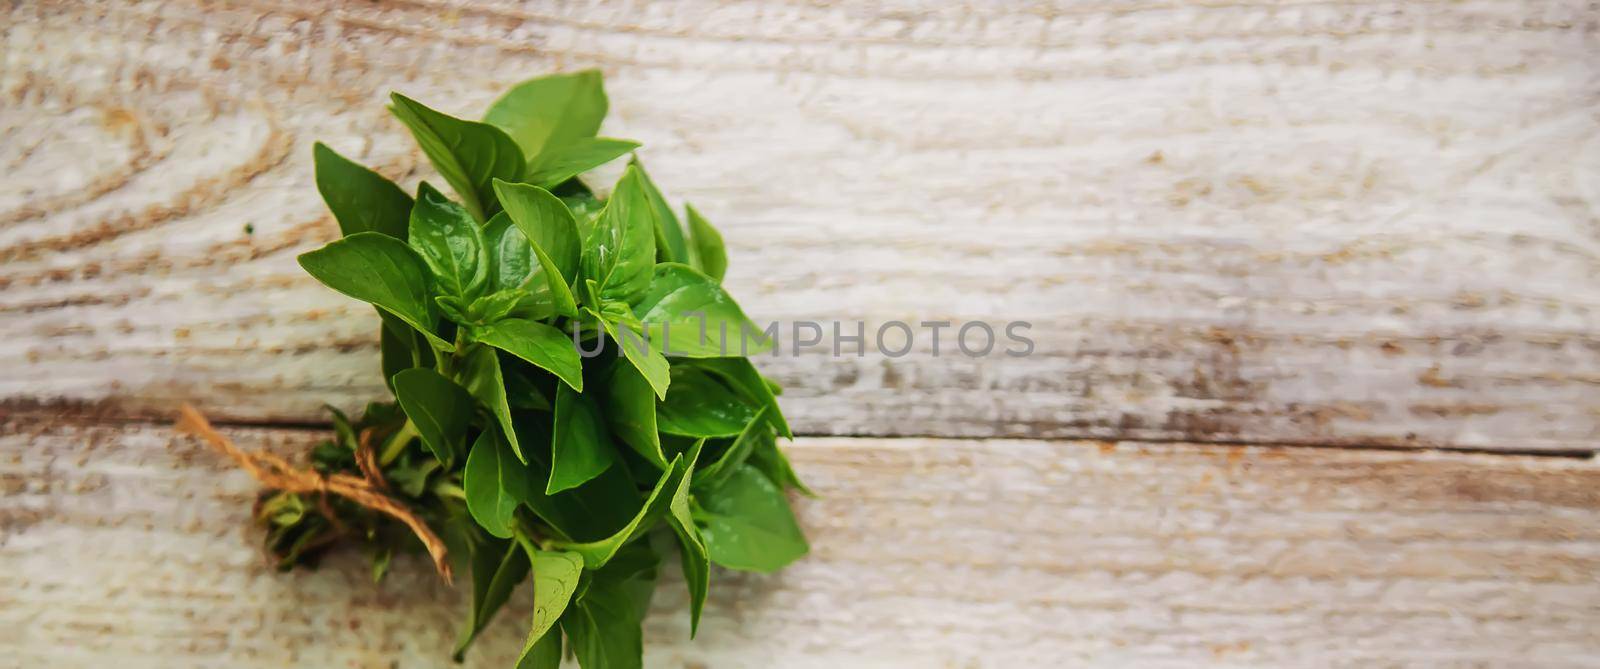 fresh home herbs from the garden. basil. Selective focus. by mila1784